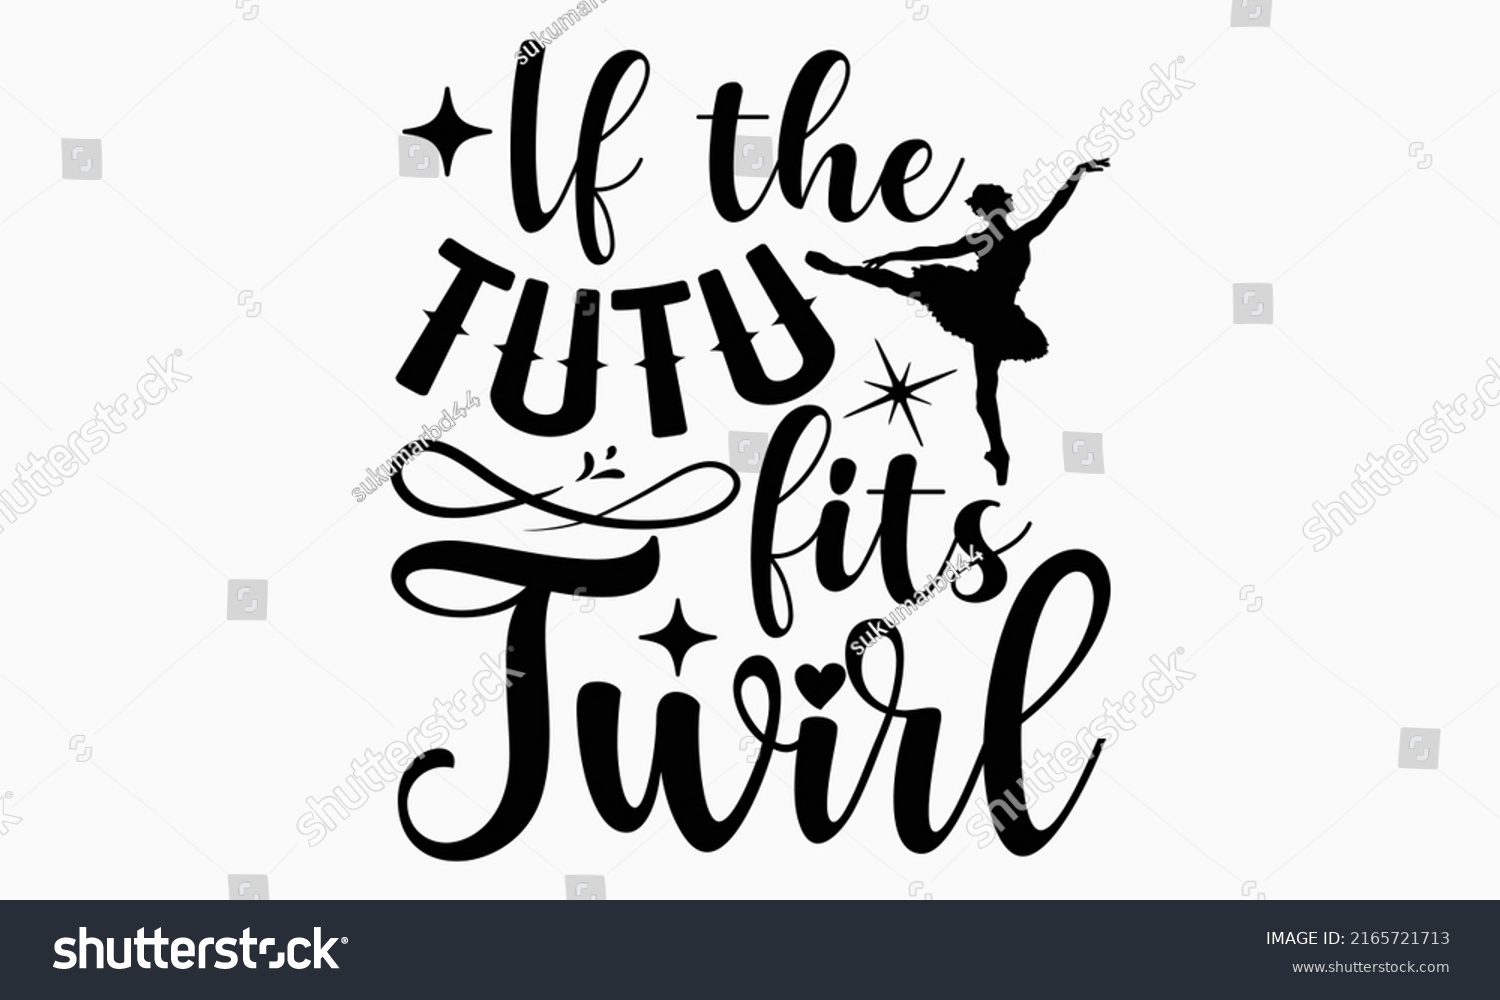 SVG of If the tutu fits twirl - Ballet t shirt design, SVG Files for Cutting, Handmade calligraphy vector illustration, Hand written vector sign, EPS svg